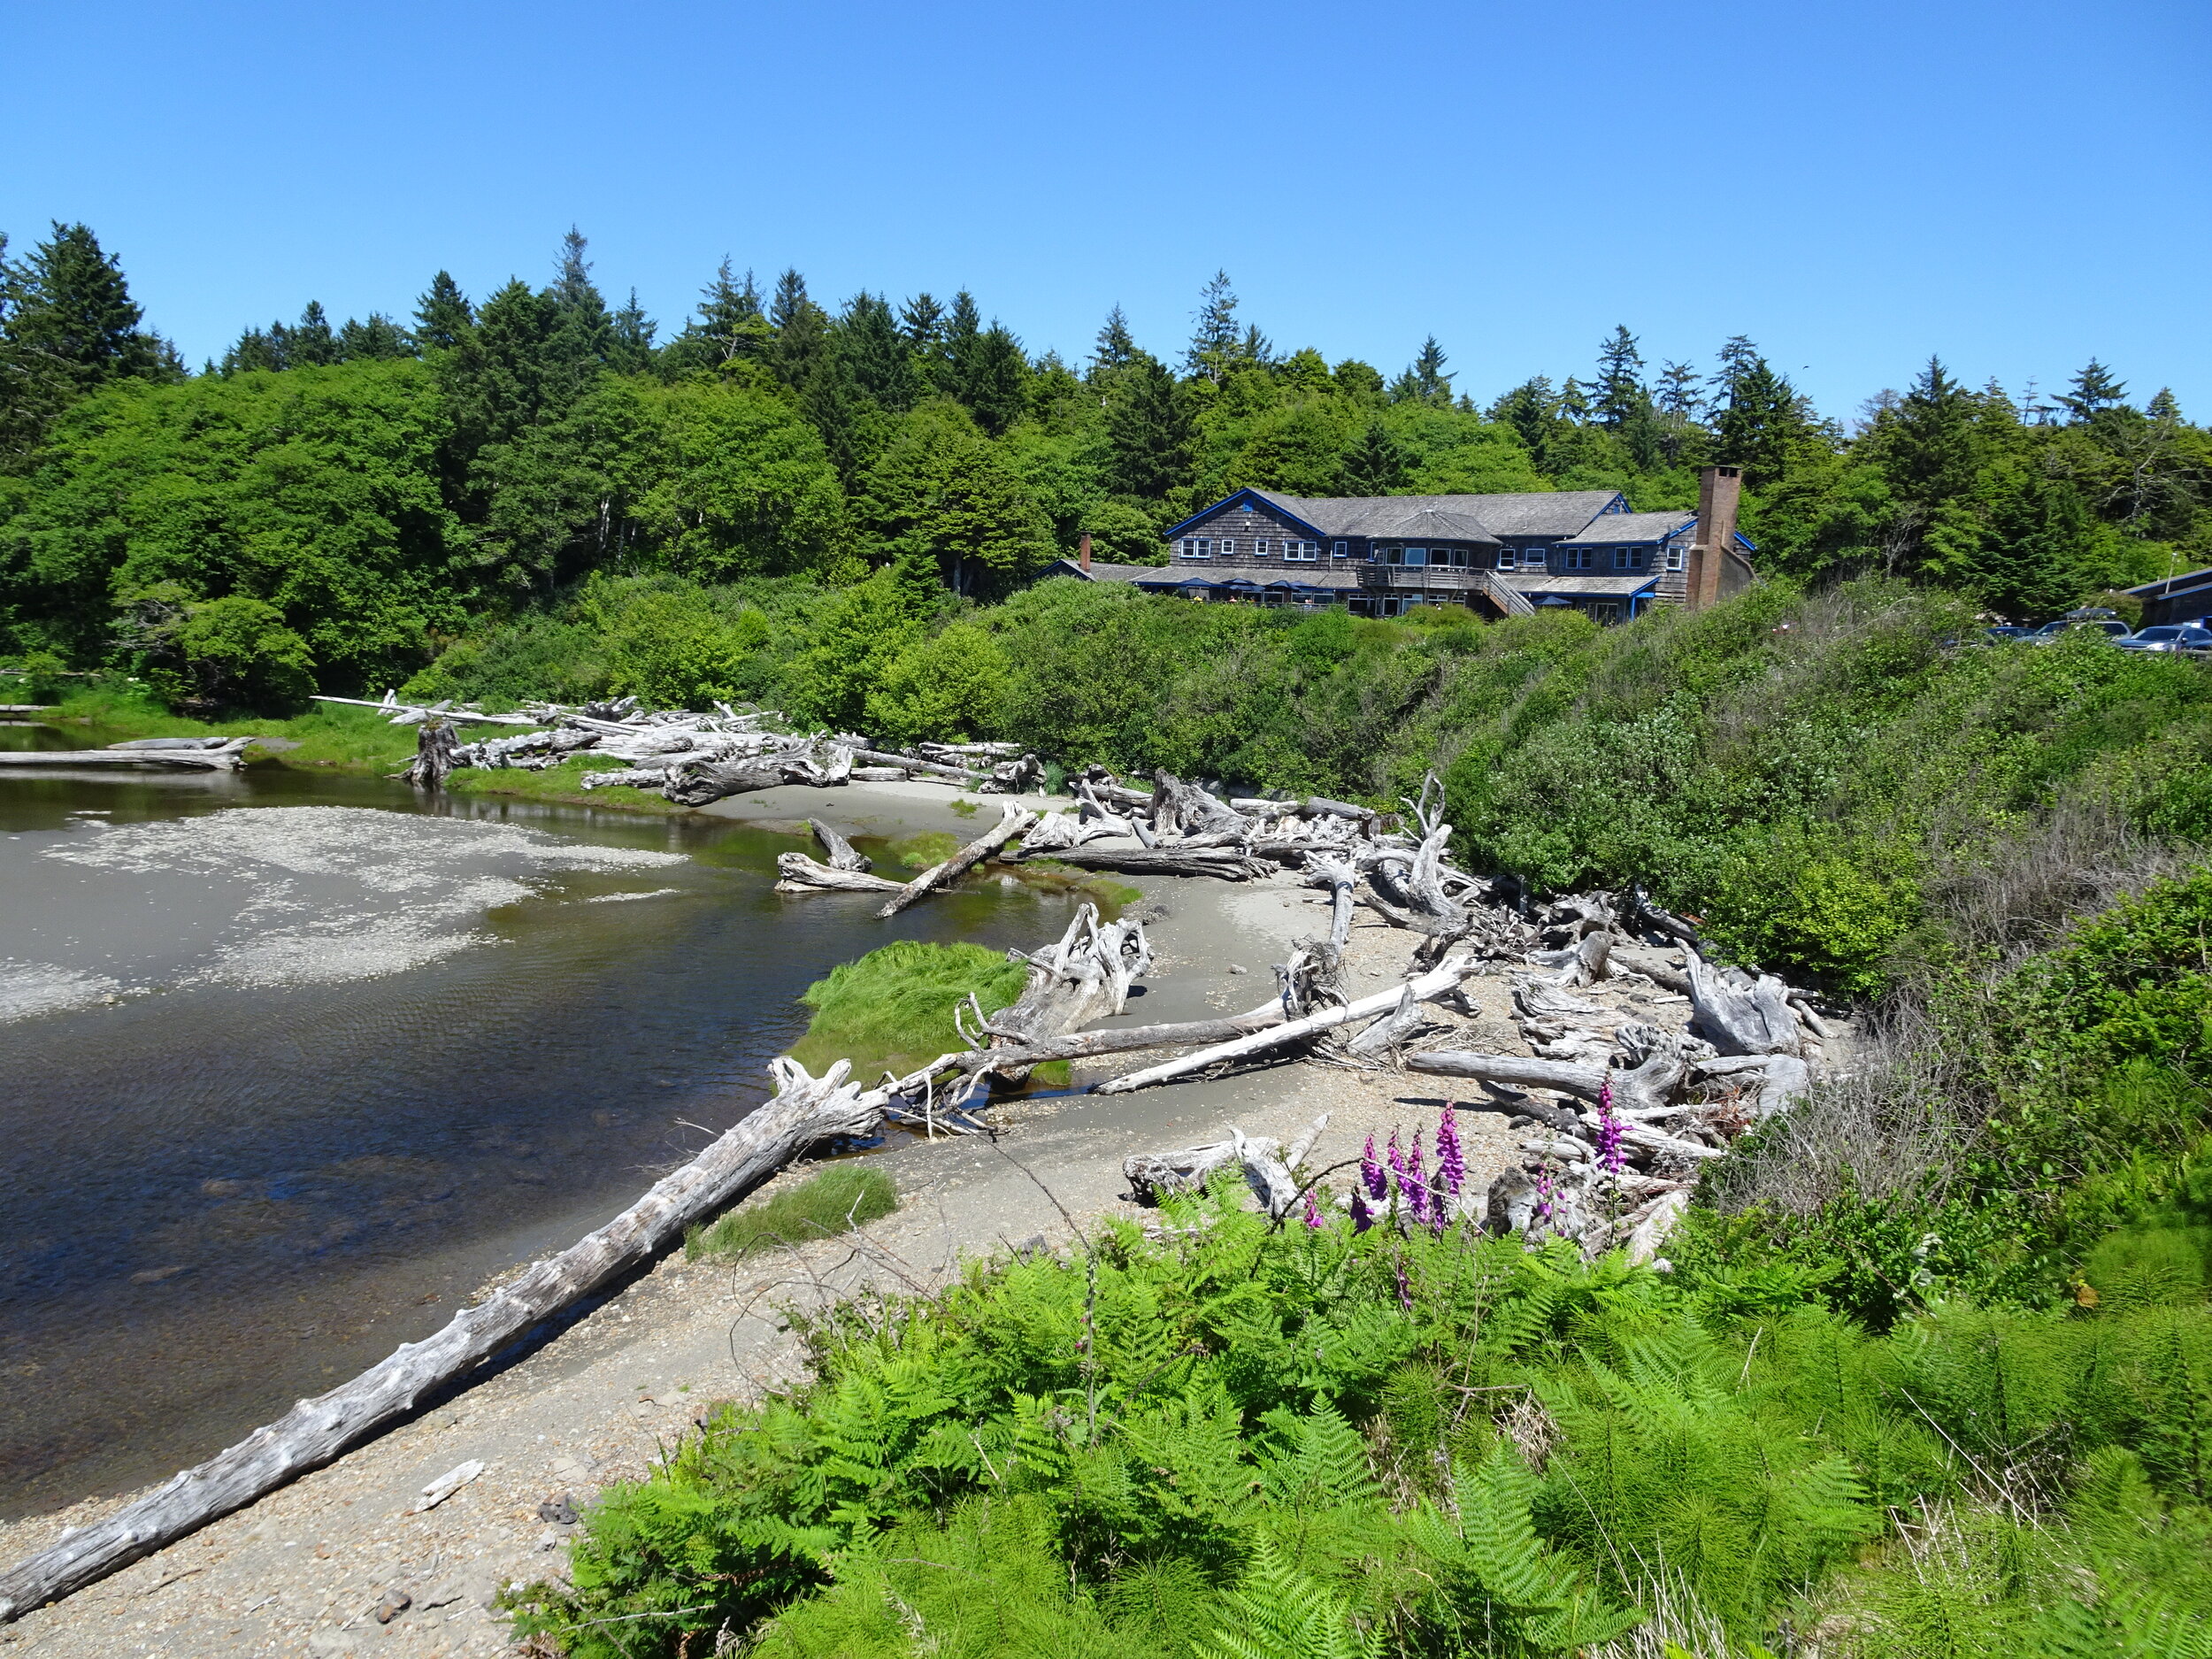 A sunny view of Kalaloch Lodge with its driftwood and wildflowers in the foreground.  Photo by Karen Boudreaux, June 16, 2021